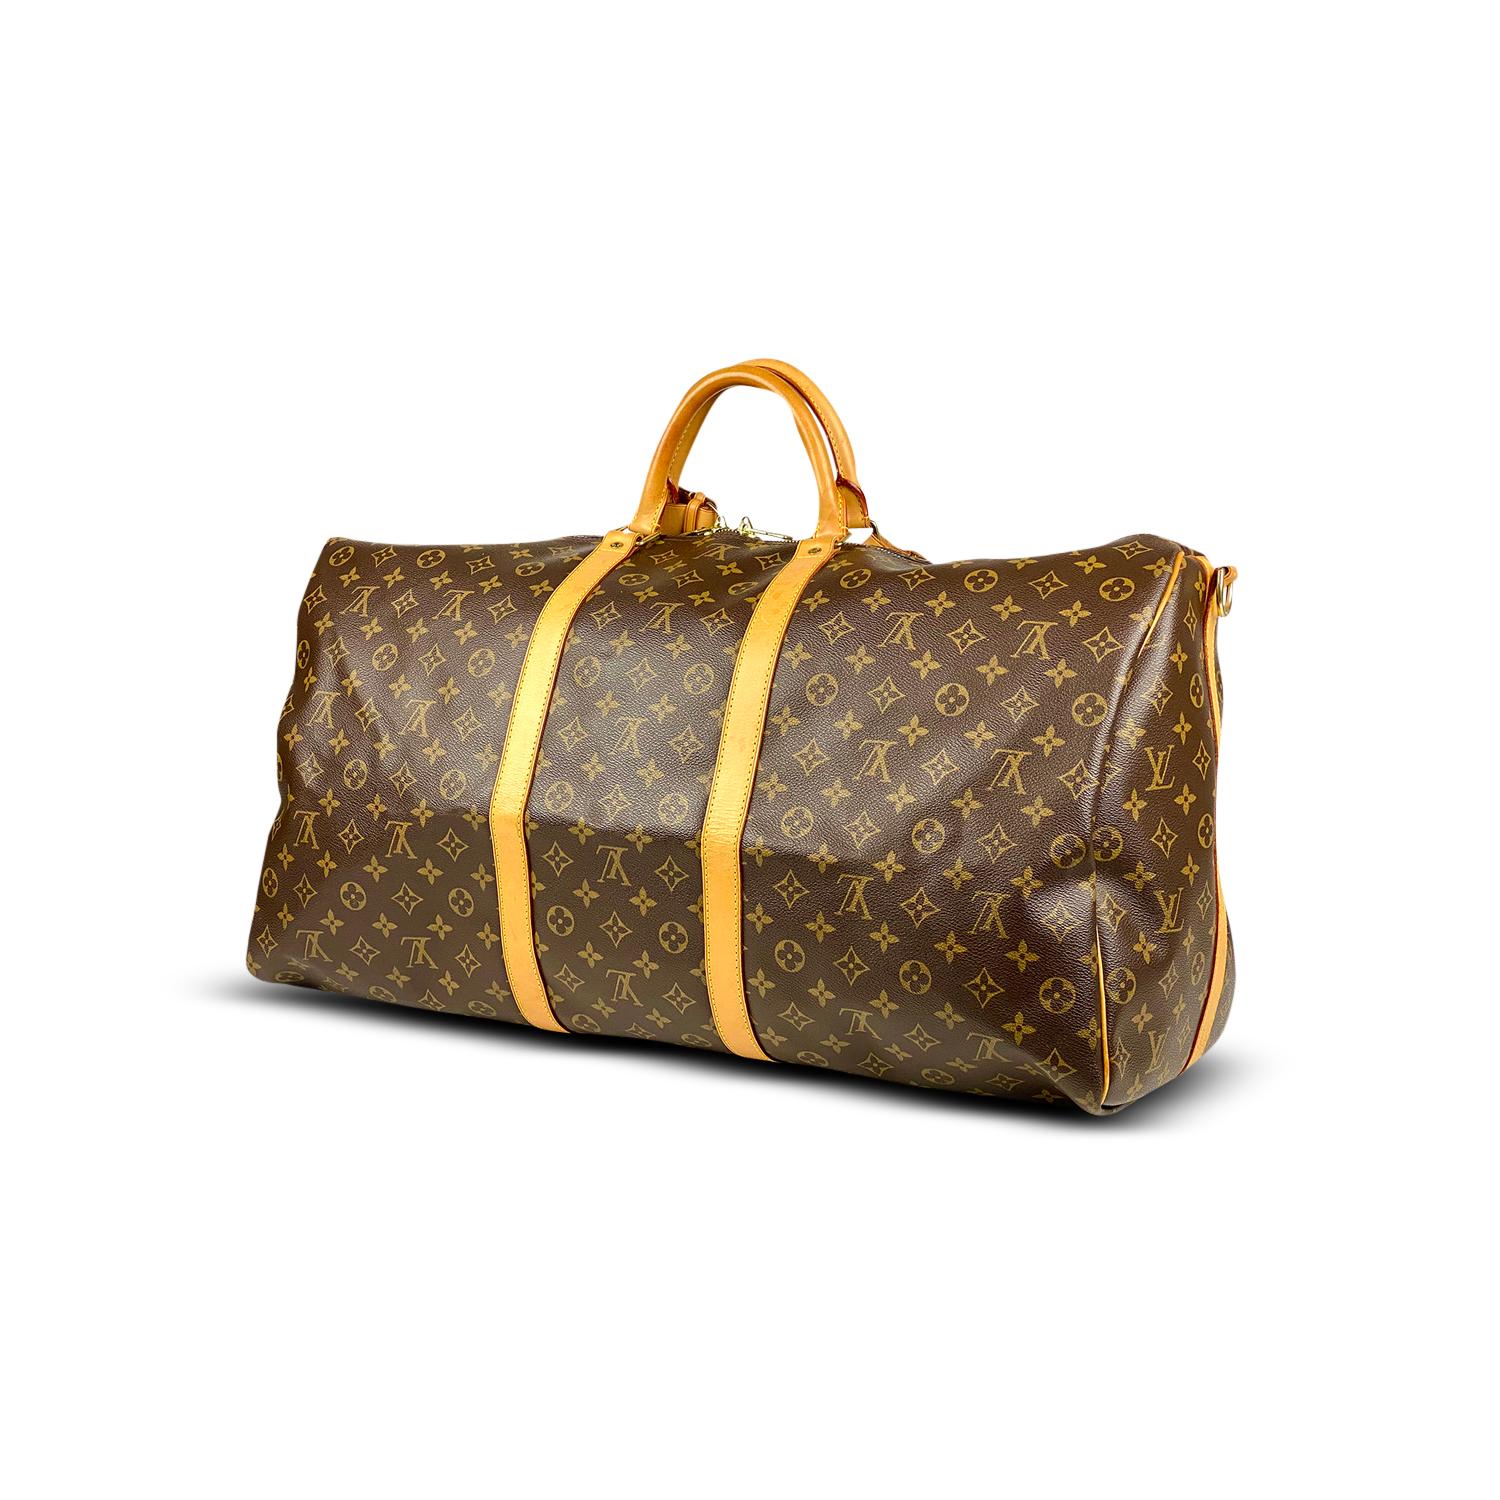 Louis Vuitton Keepall Monogram Bandoulière 60 In Good Condition For Sale In Sundbyberg, SE